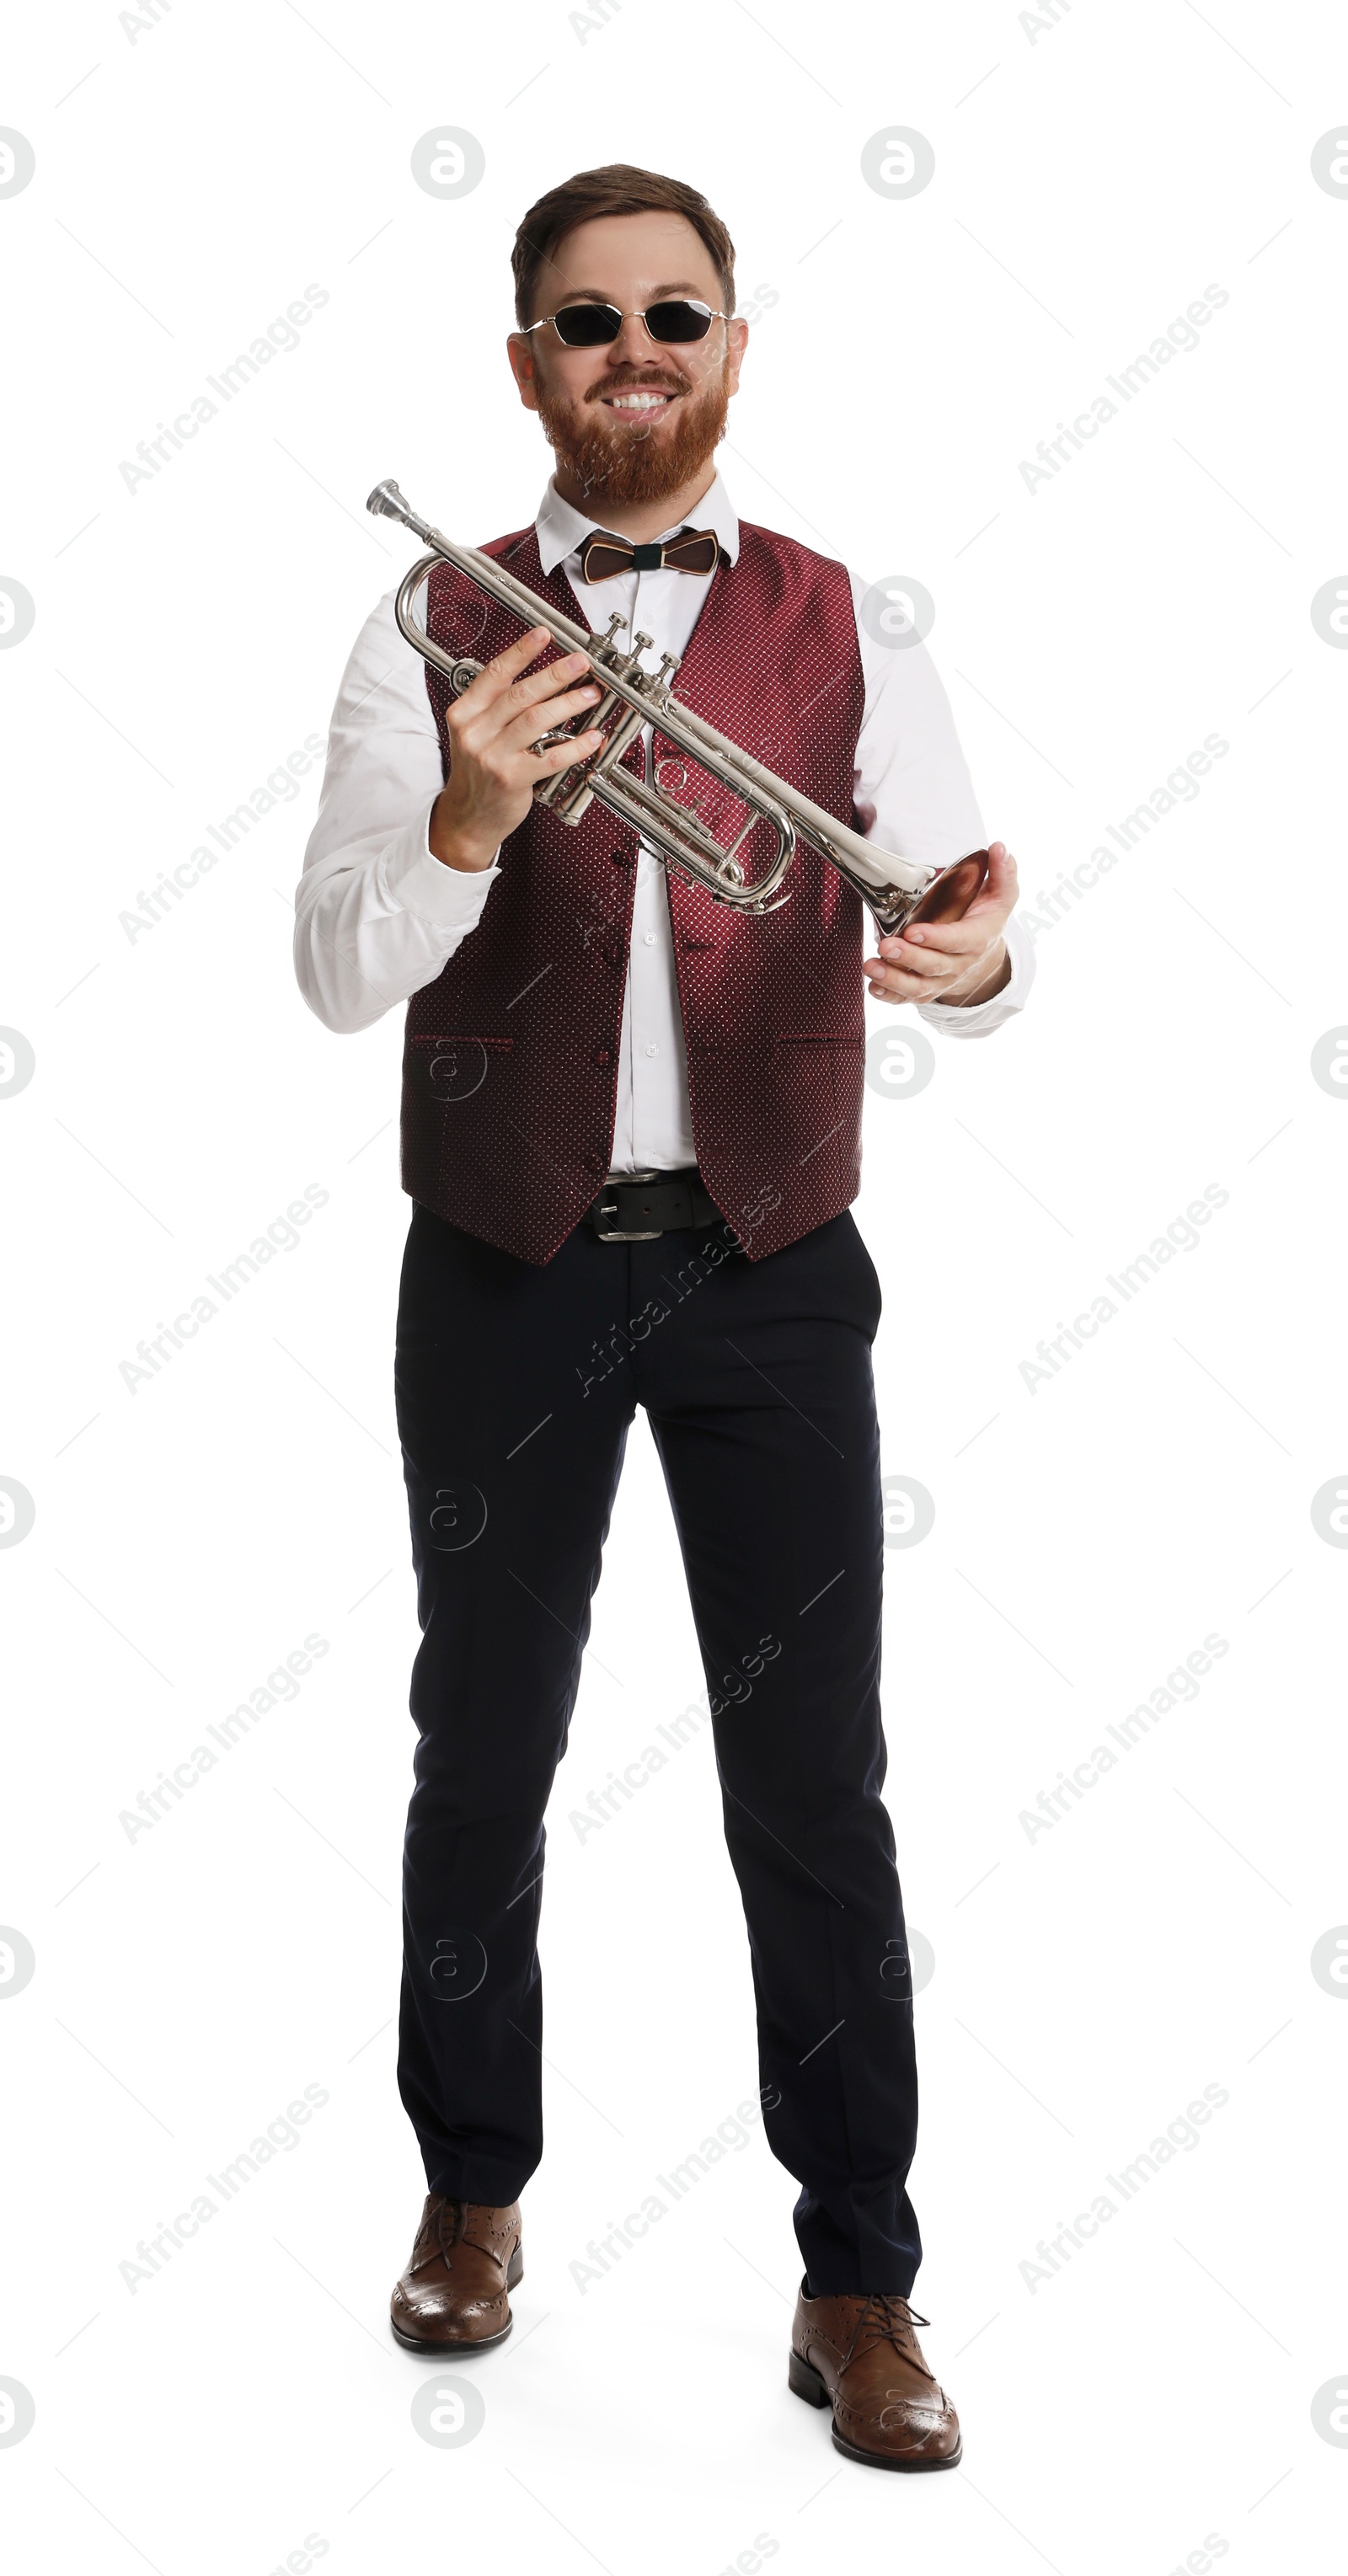 Photo of Smiling musician with trumpet on white background